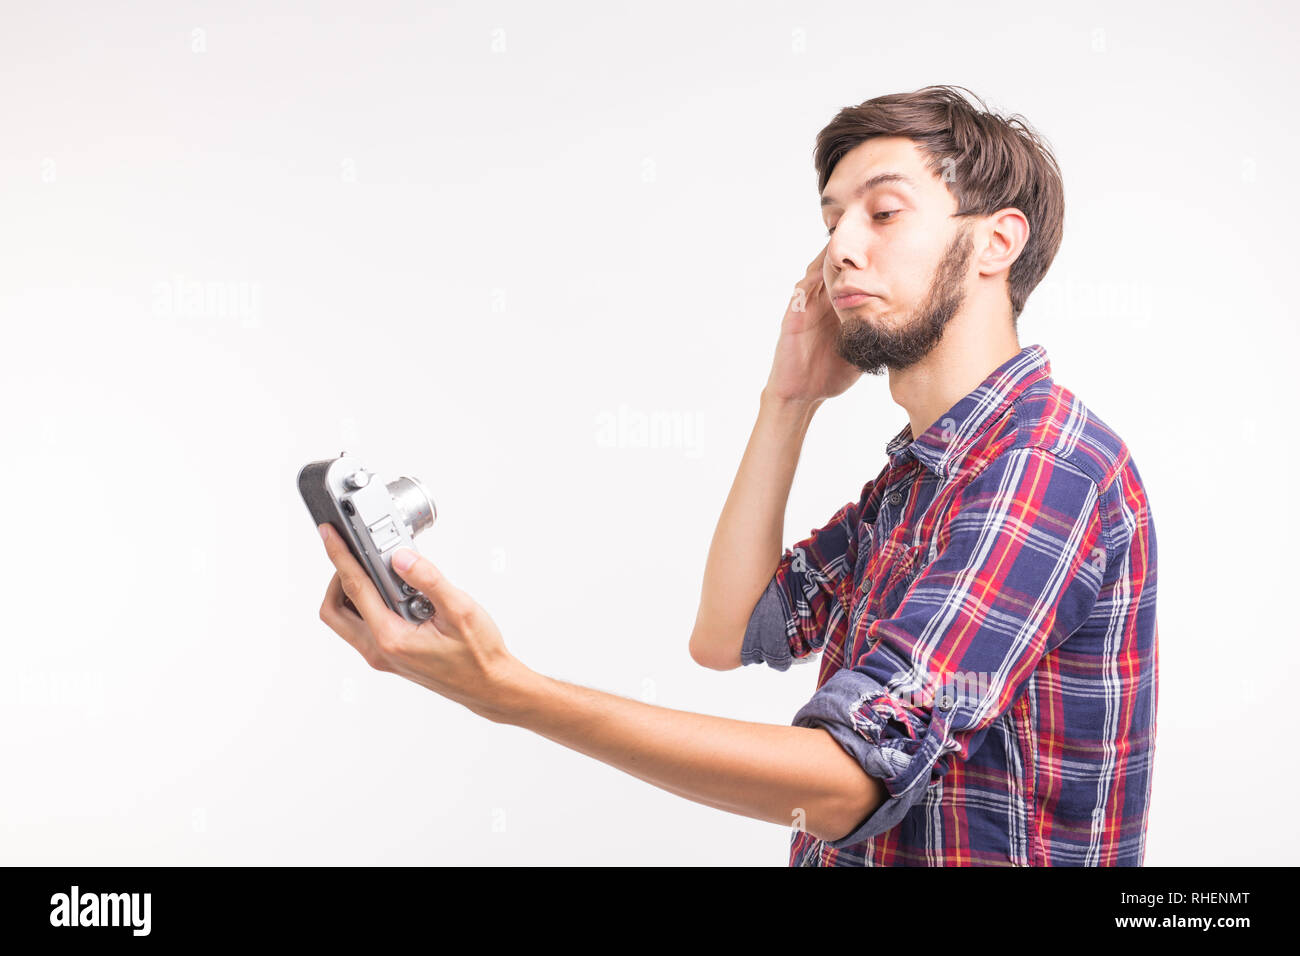 Technology, photography and people concept - Handsome man in plaid shirt taking a selfies on vintage camera Stock Photo